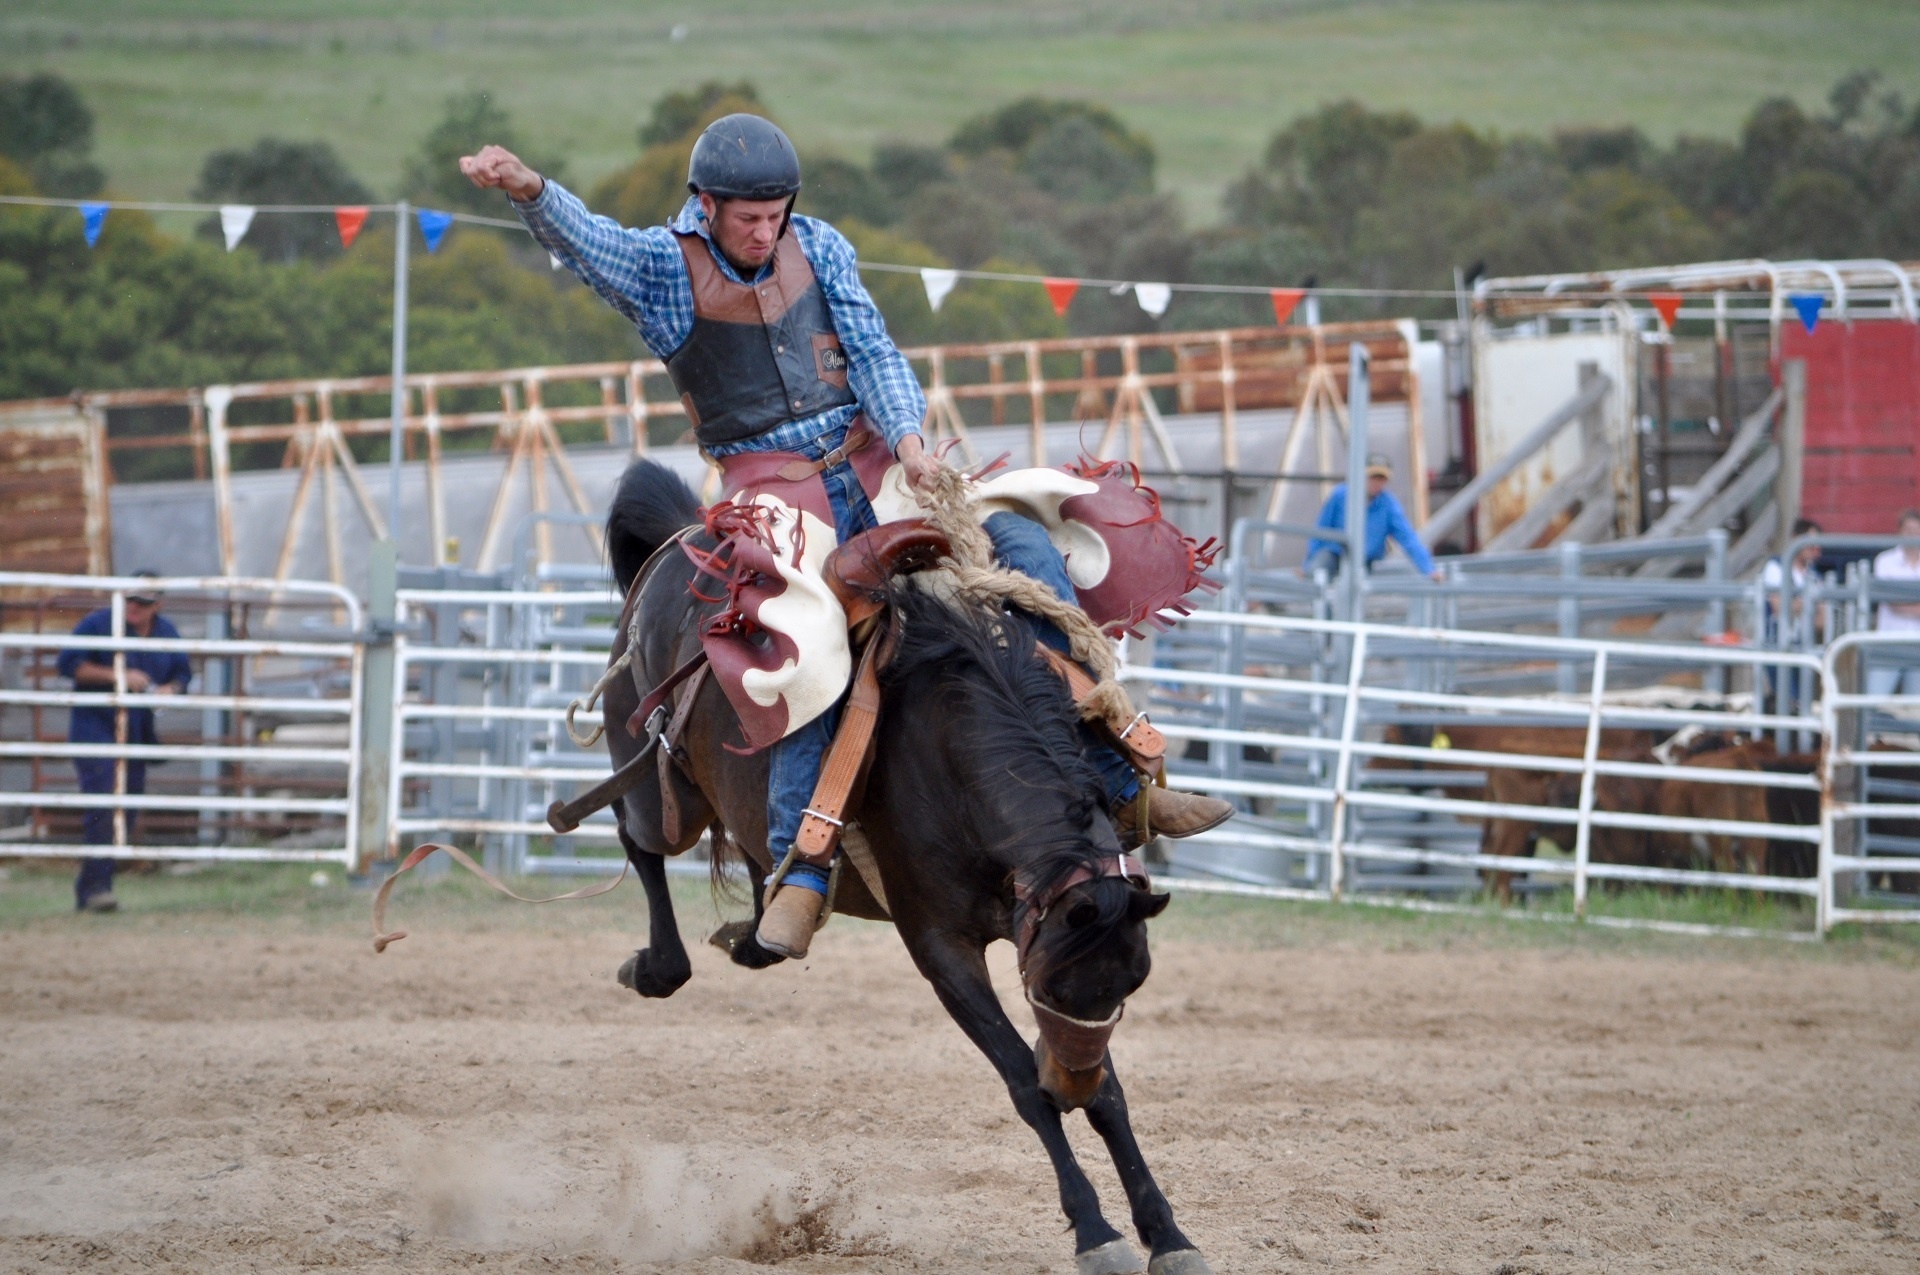 Rodeo: PRCA rules, Rodeo animals, Bucking horses. 1920x1280 HD Wallpaper.